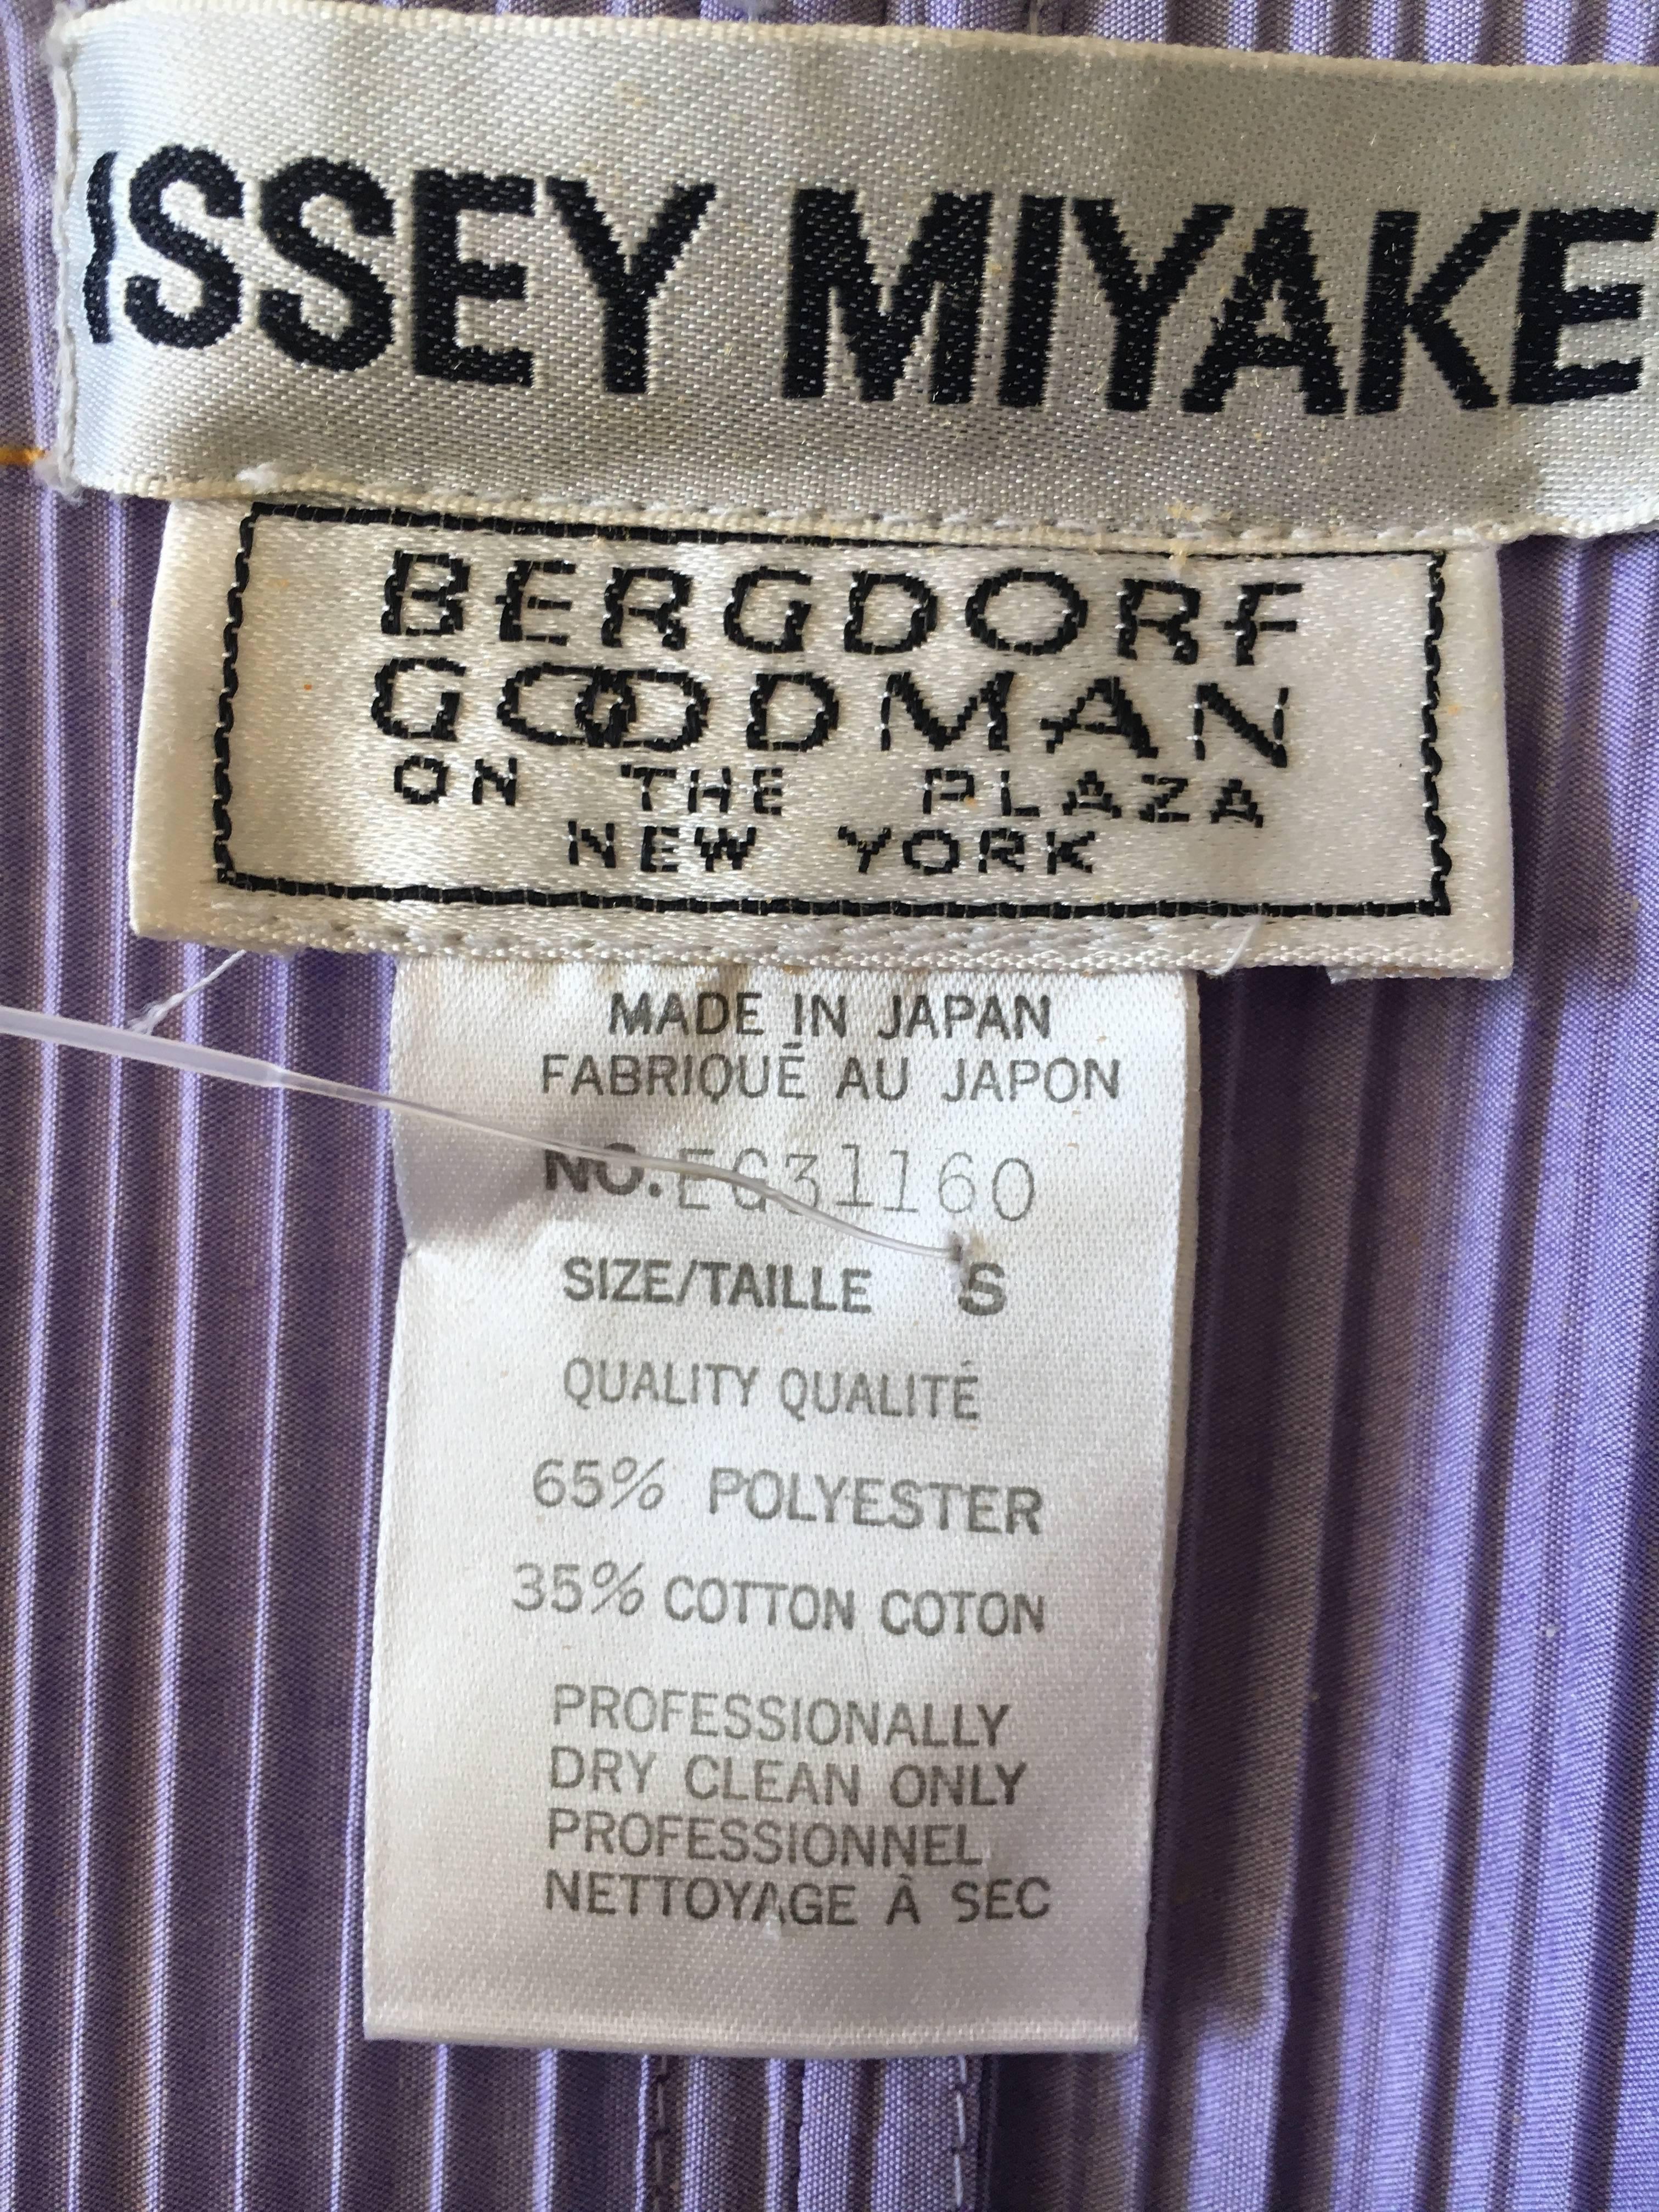 Wonderfully witty pleated purple suit from Issey Miyake for Bergdorf Goodman with a trompe L'oeil yellow top stitch throughout, like a denim jacket and pants.
Subtle , so chic.
Size Small
Pant 
Waist 22"
Hips 40"
Inseam 27"
Excellent